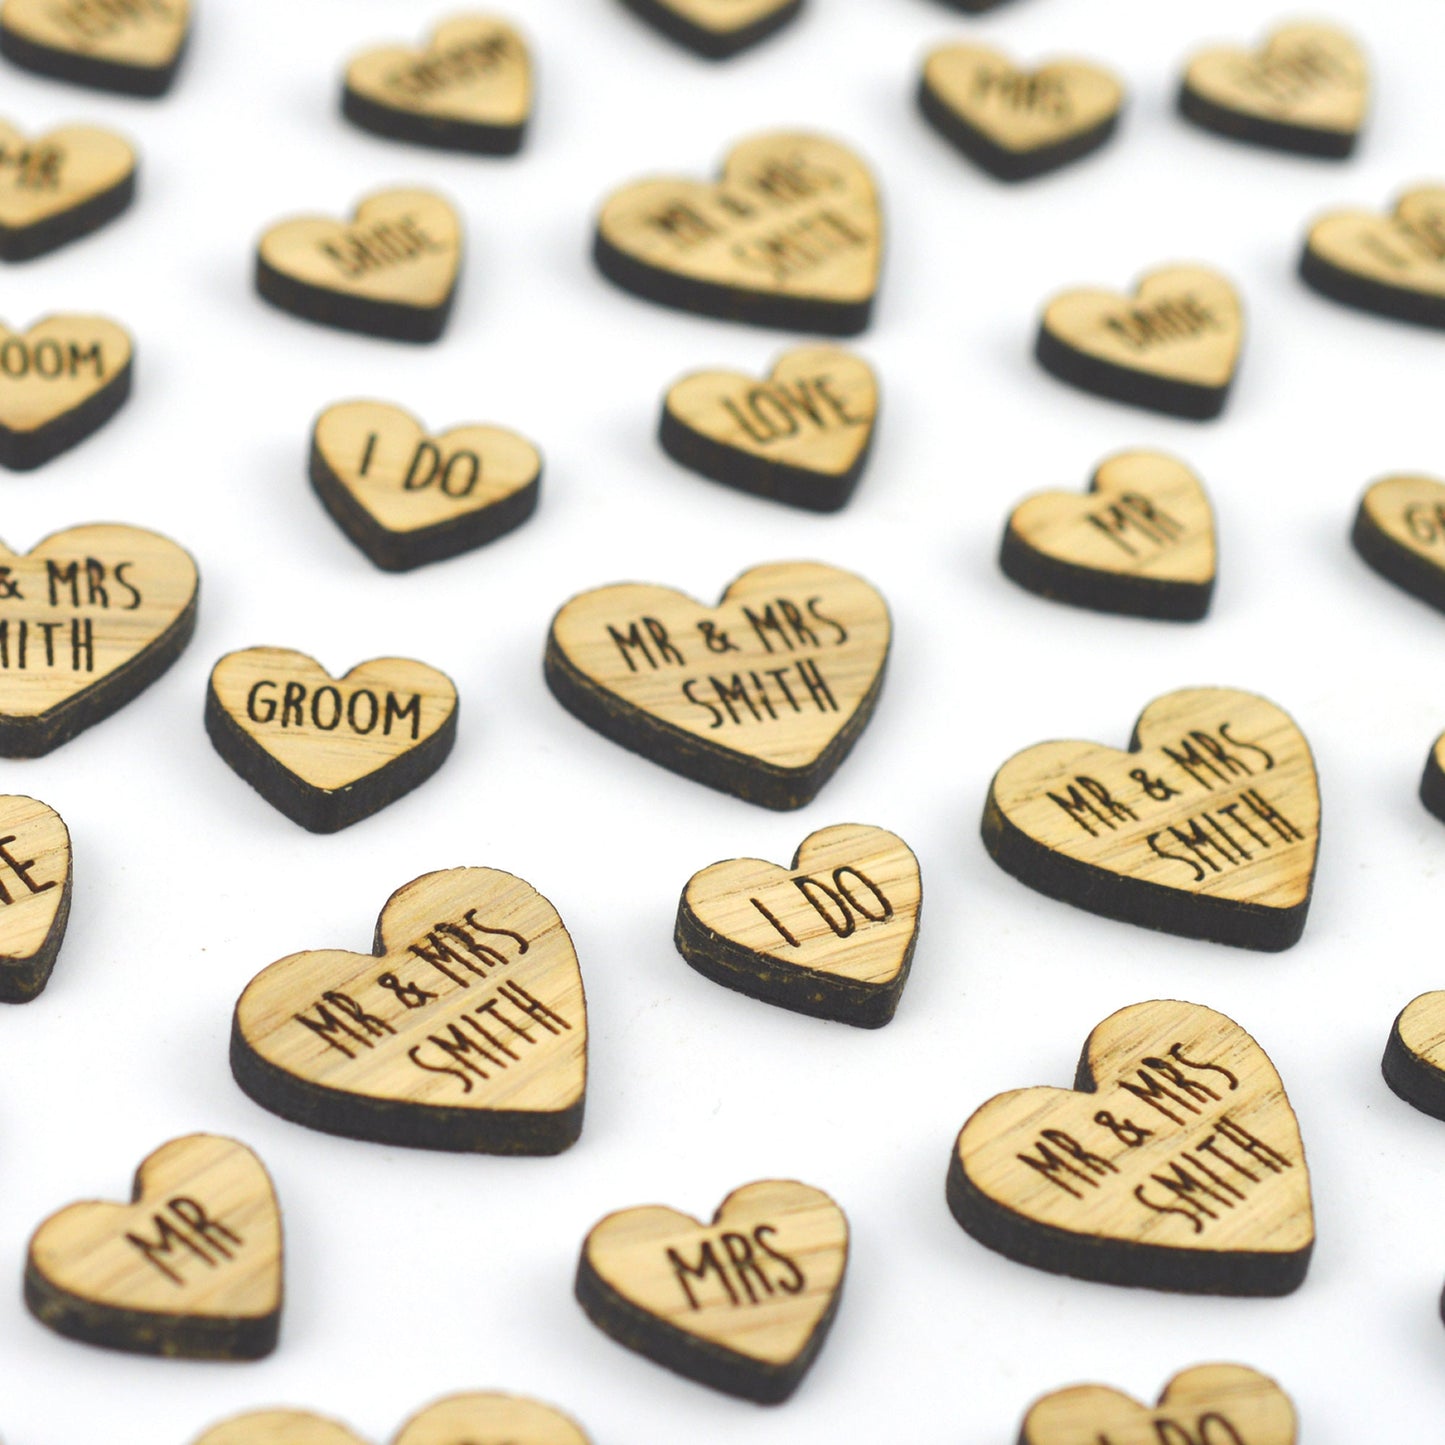 Personalised MIXED Heart Shaped Wooden Rustic Wedding Table Confetti